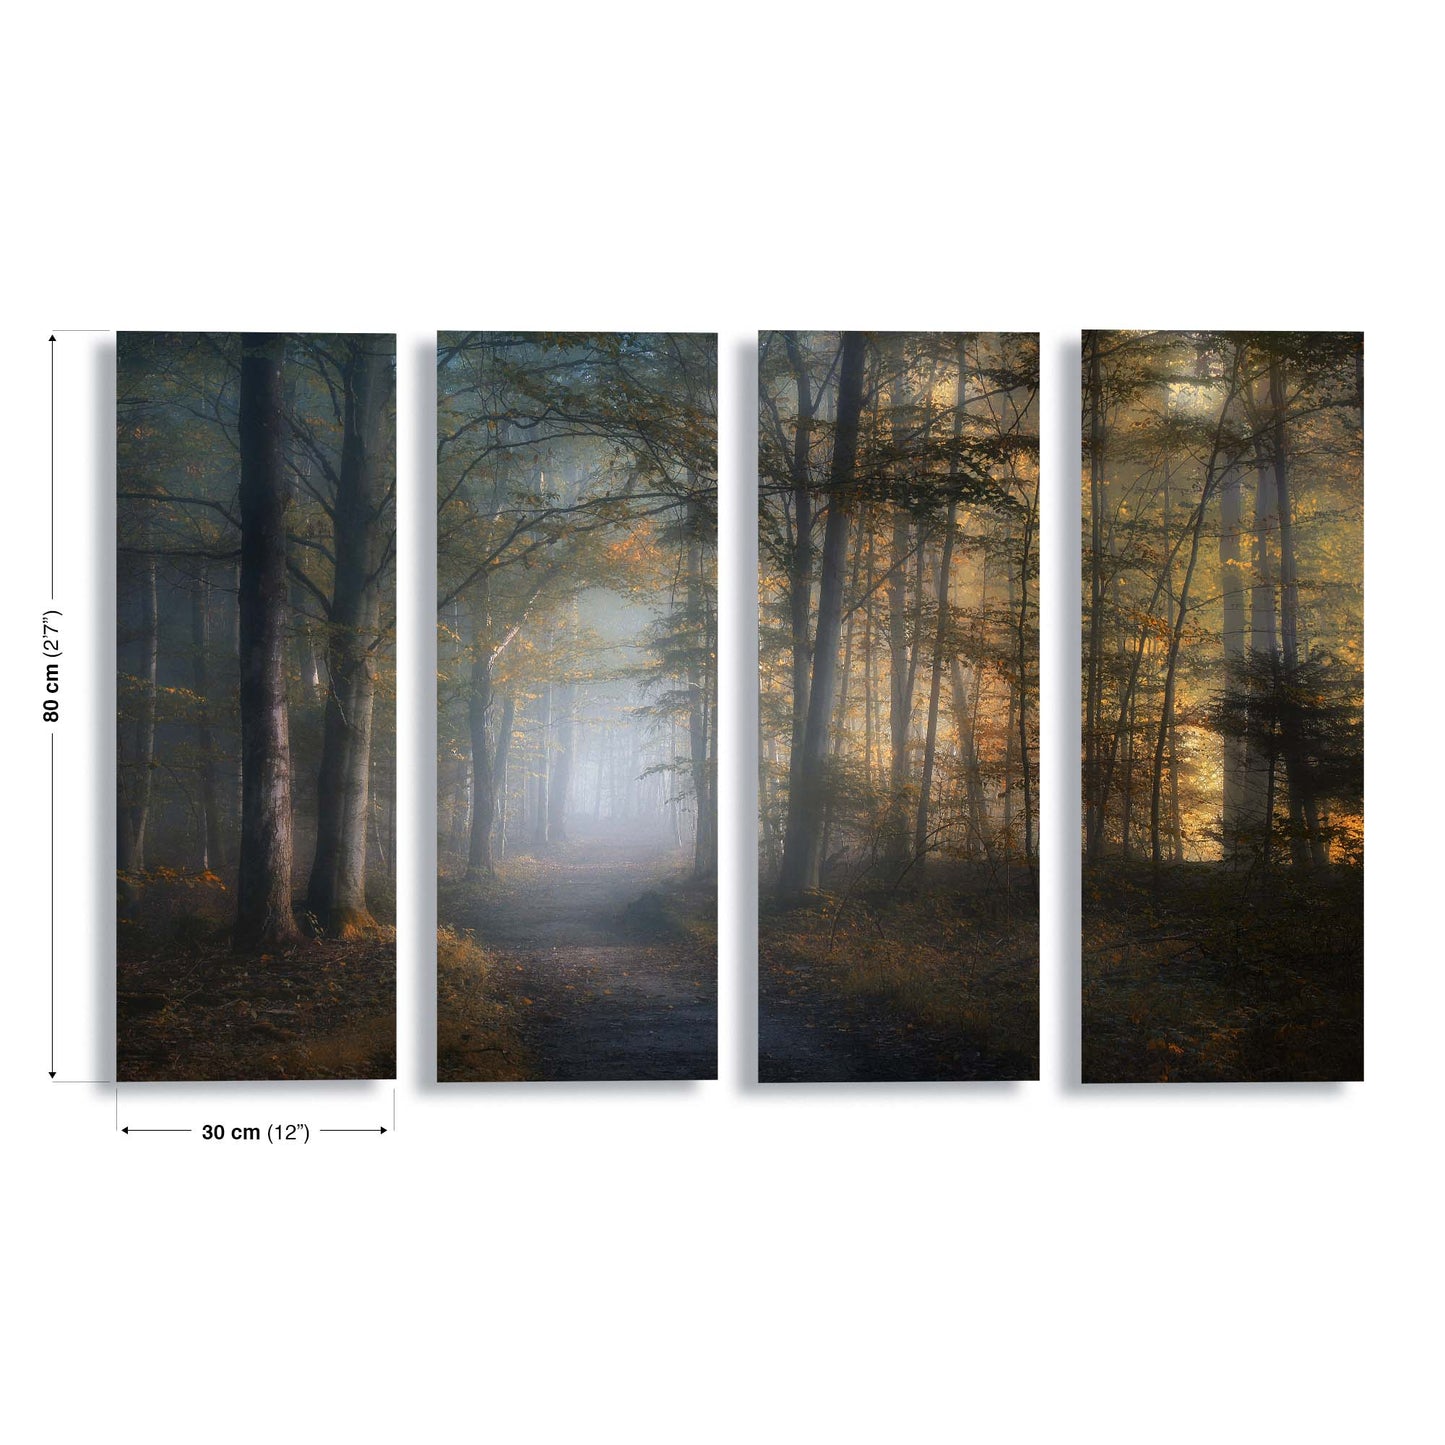 Autumn Symphony by Norbert Maier Canvas Print - USTAD HOME